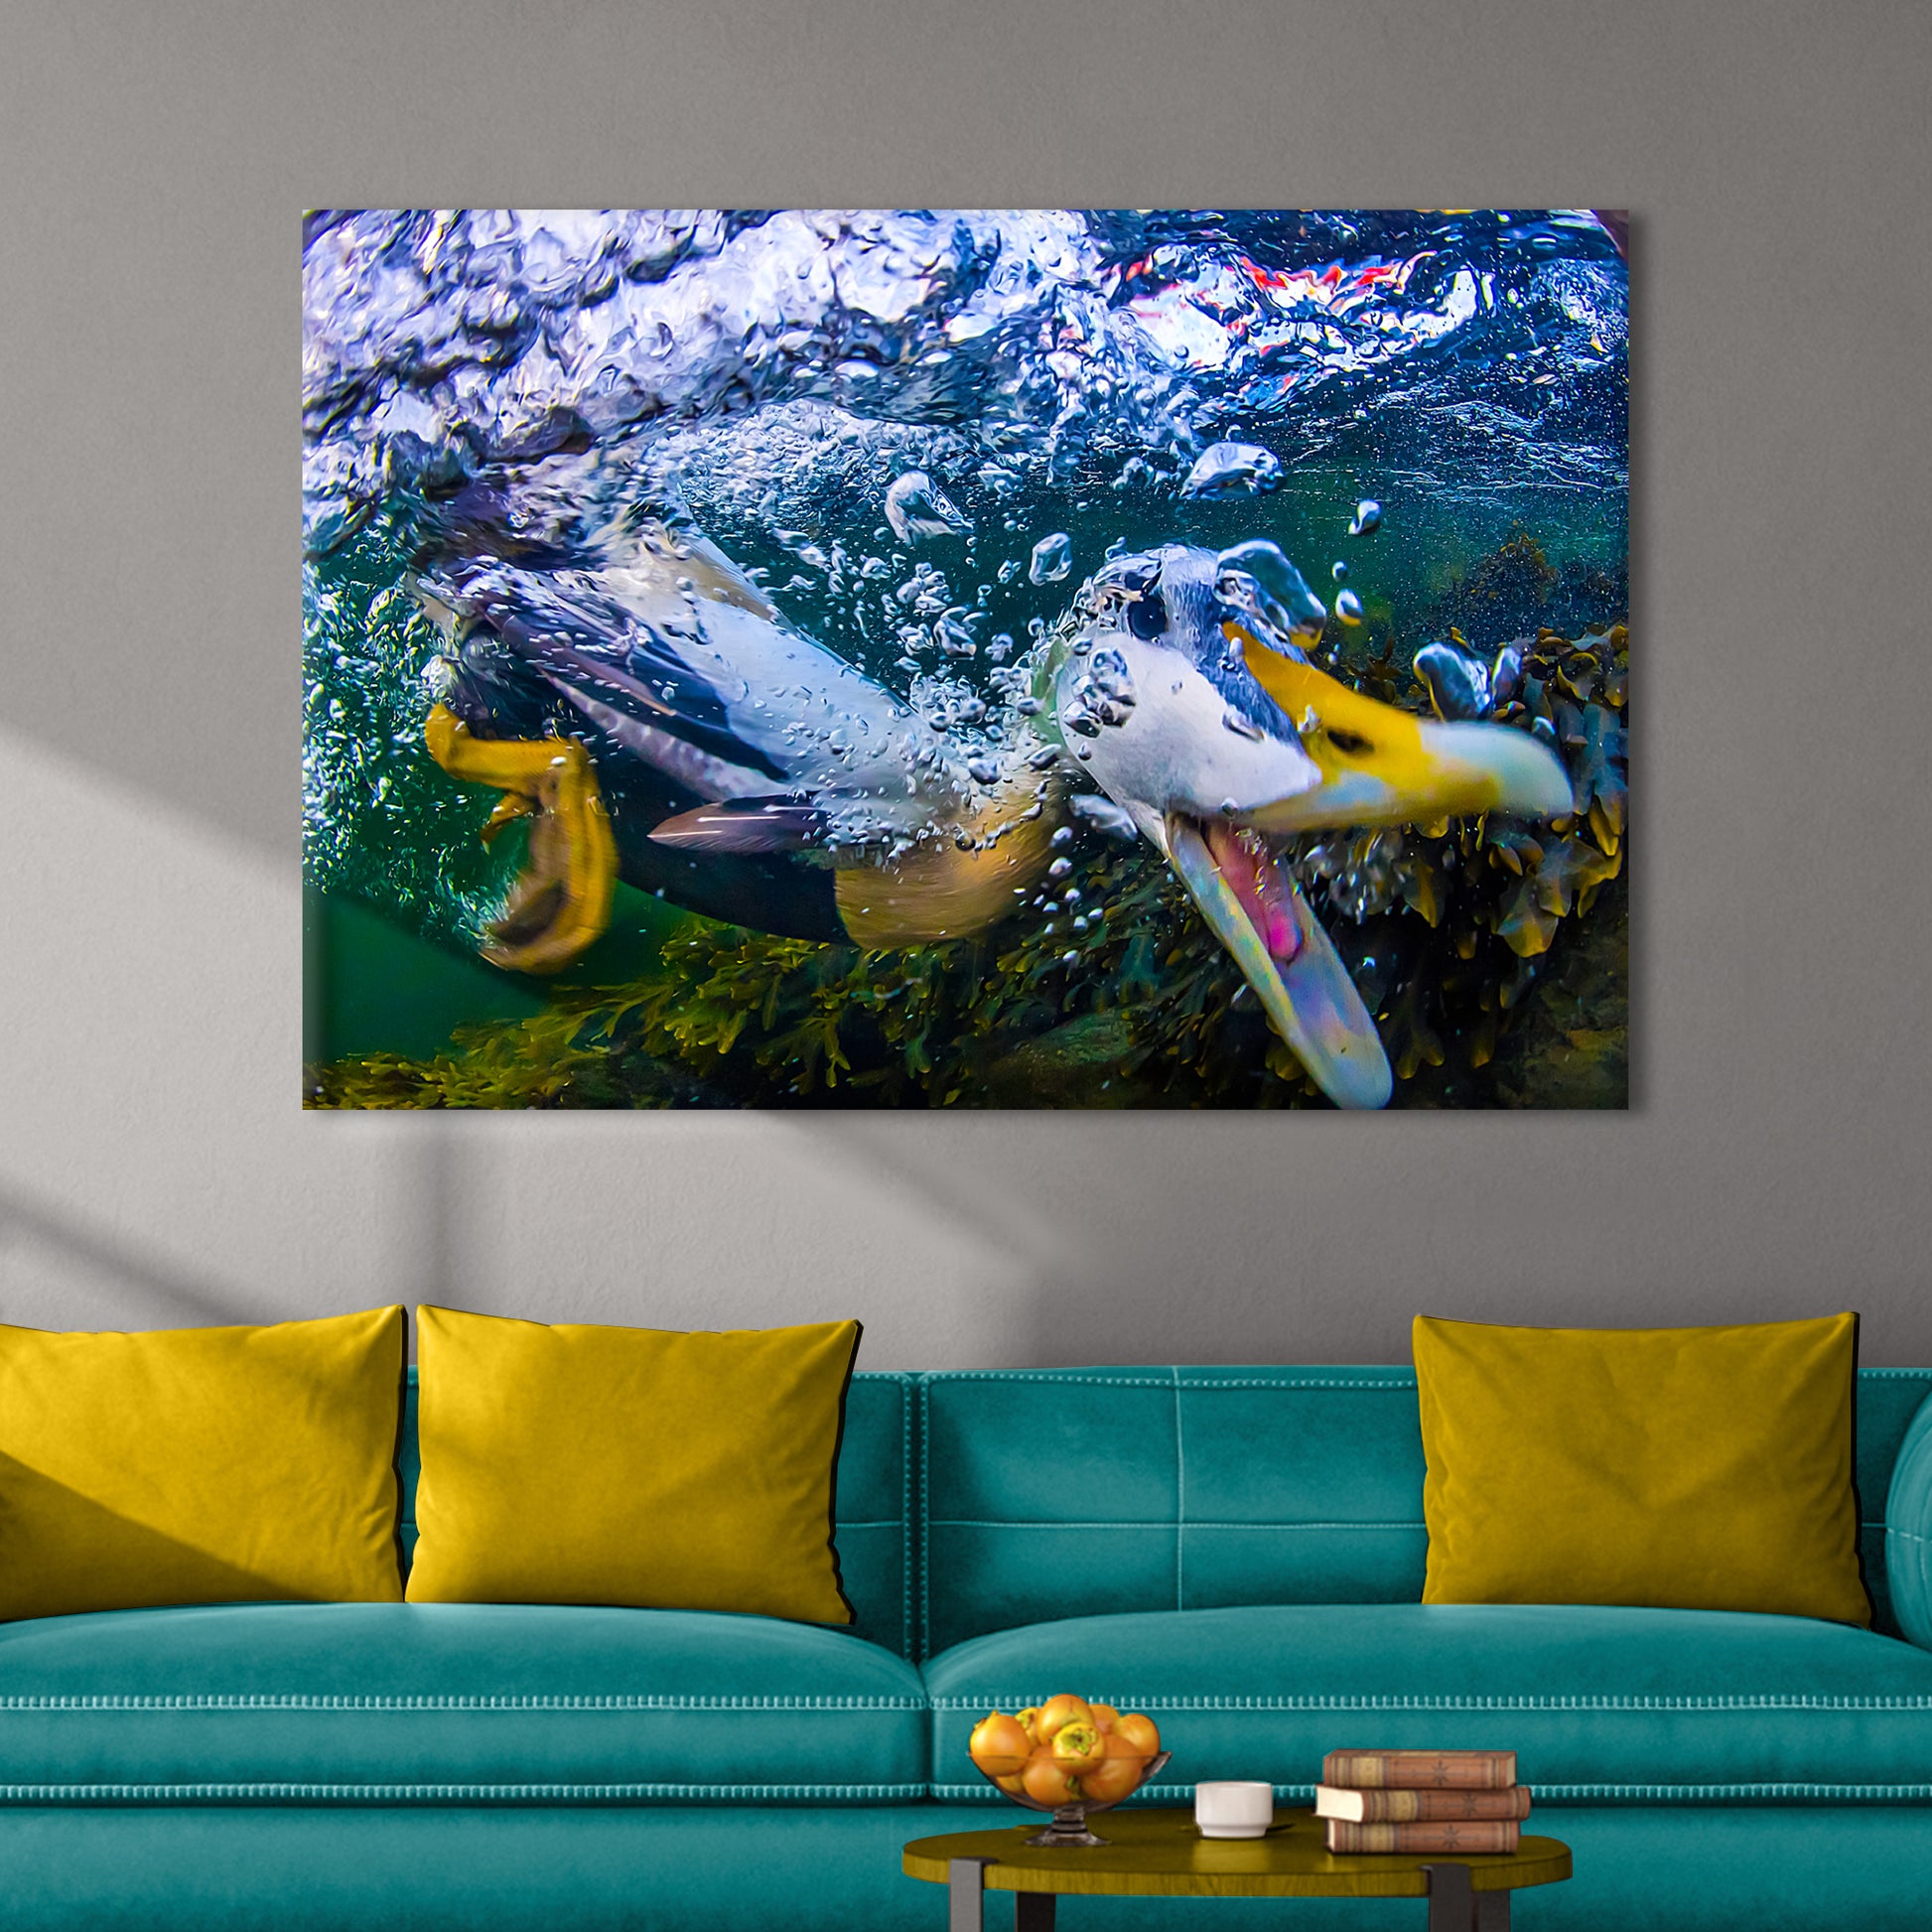 Diving Duck Canvas Wall Art - Image by Tailored Canvases